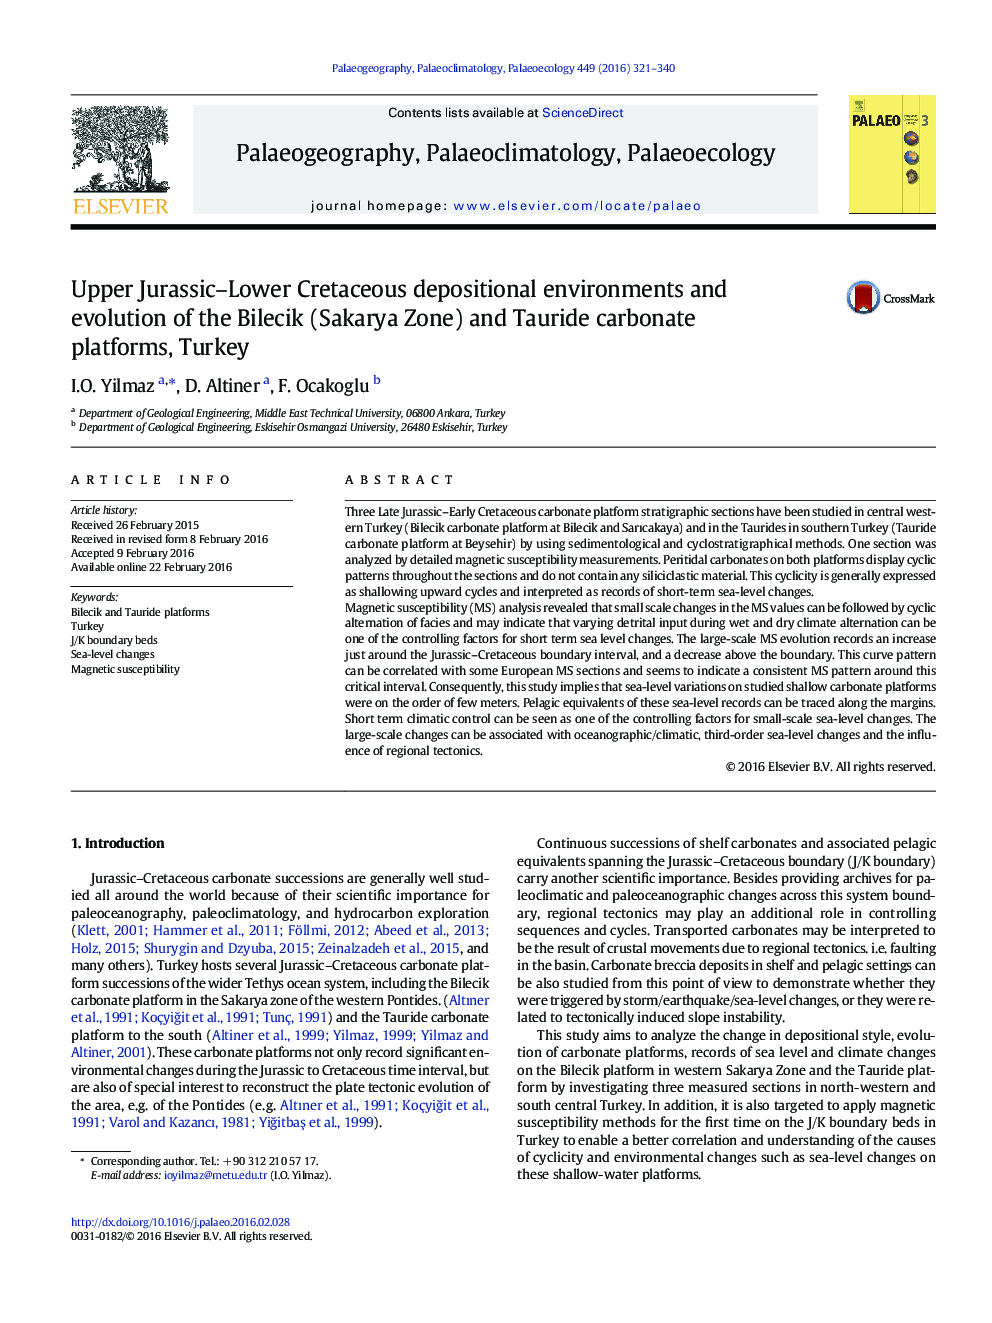 Upper Jurassic–Lower Cretaceous depositional environments and evolution of the Bilecik (Sakarya Zone) and Tauride carbonate platforms, Turkey